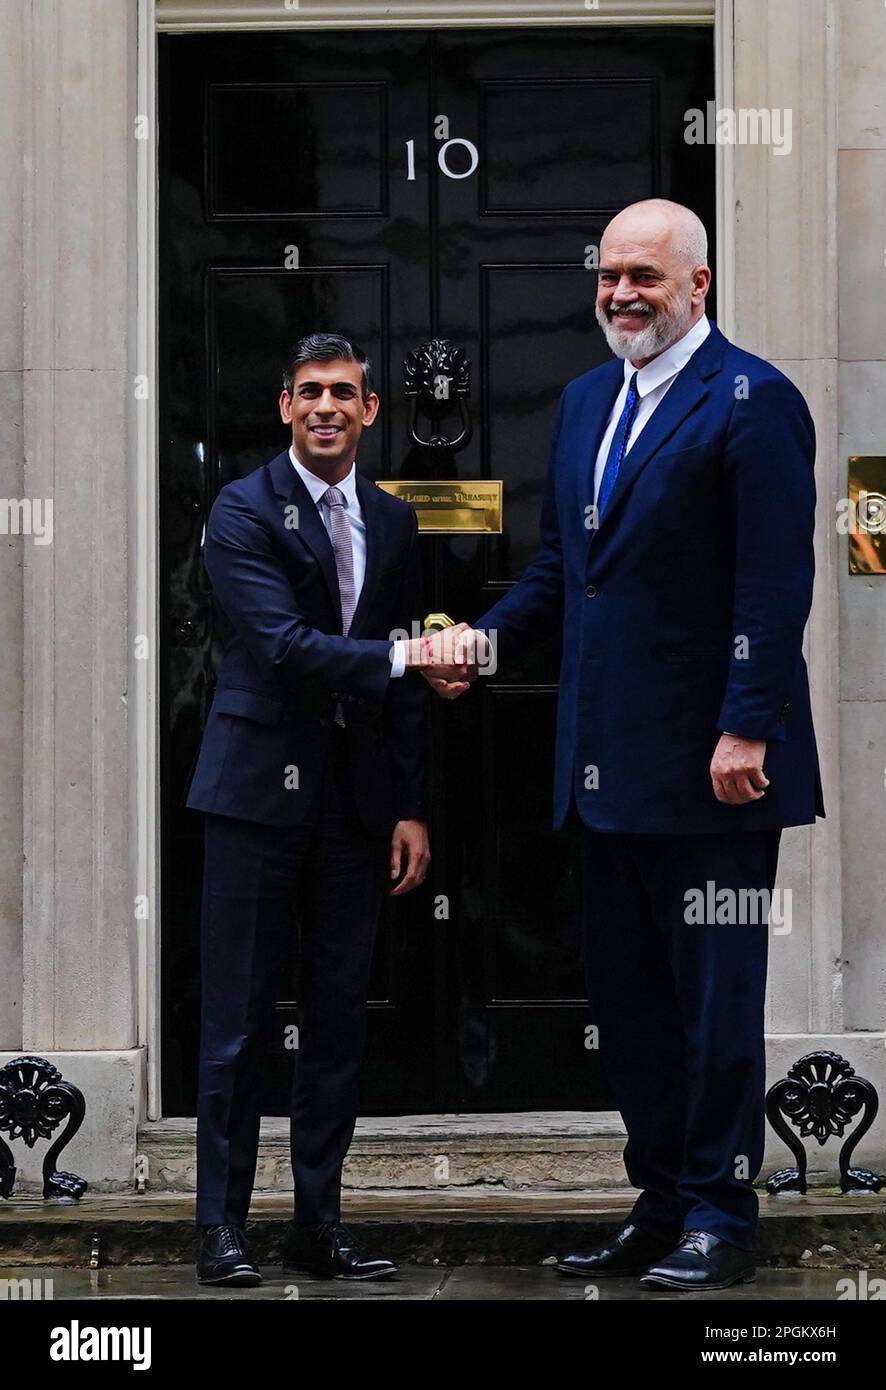 Prime Minister Rishi Sunak (left) welcomes the Albanian Prime Minister Edi Rama to 10 Downing Street, London, ahead of their meeting. Stock Photo